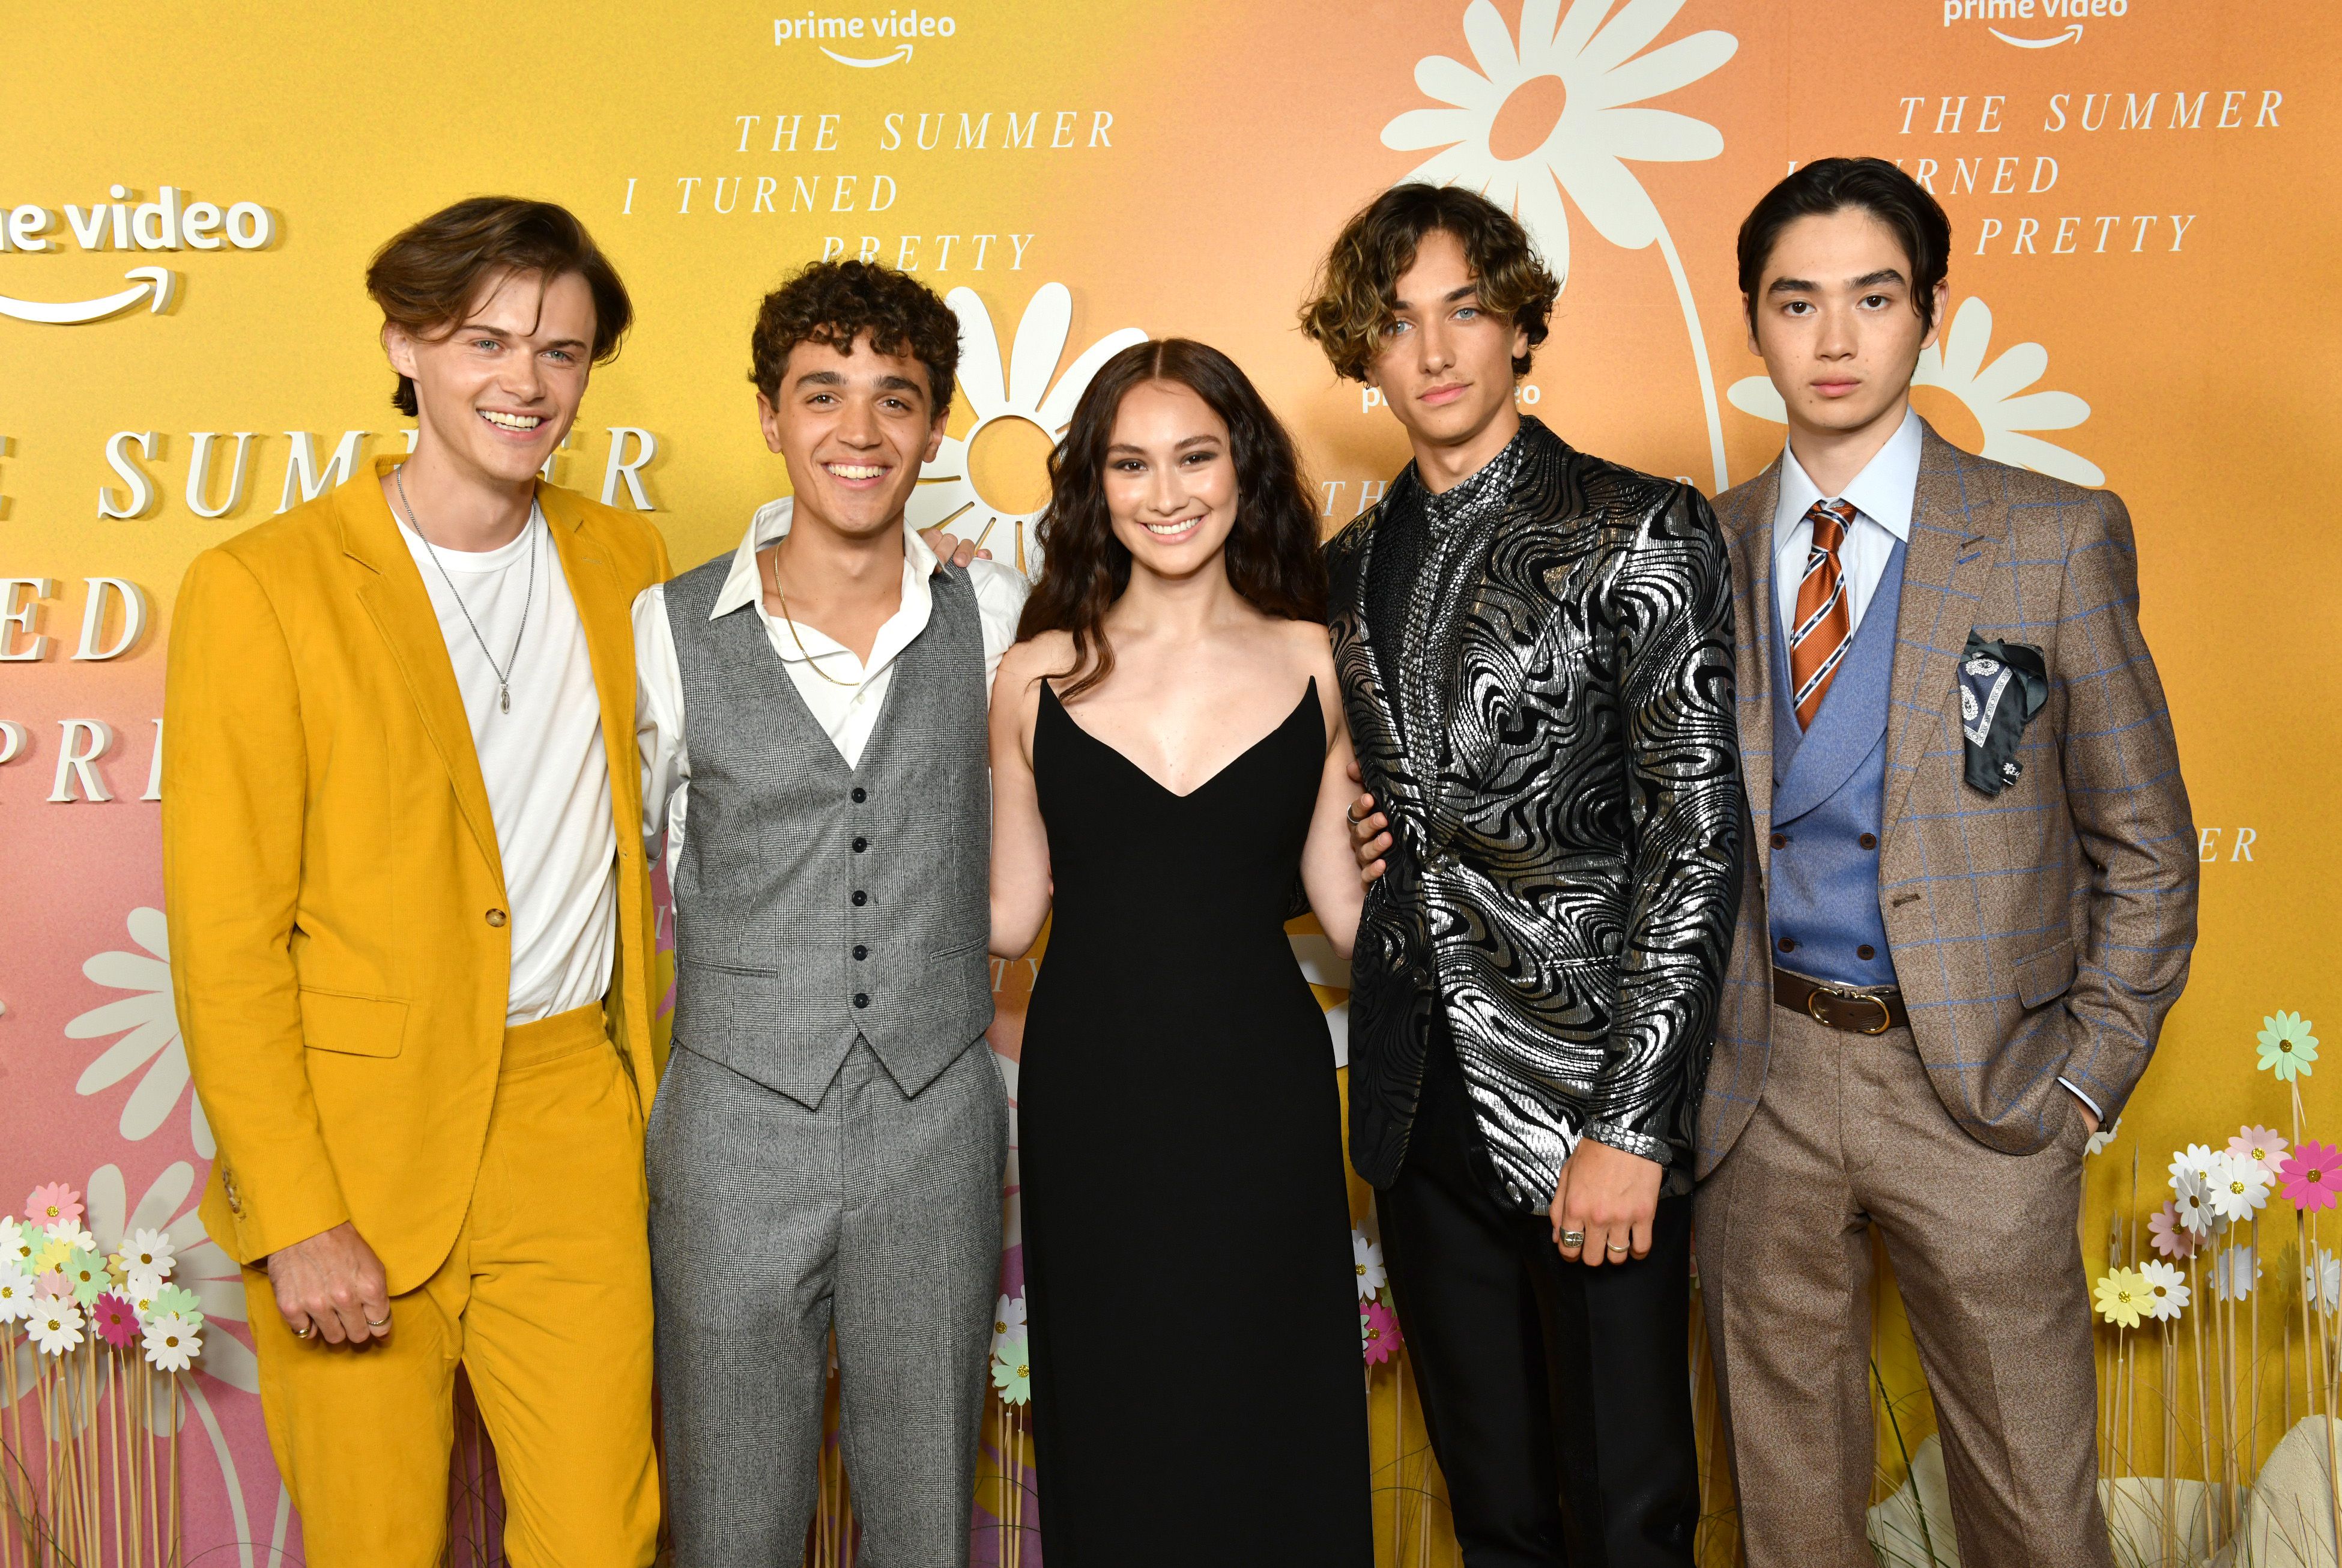 Christopher Briney, David Iacono, Lola Tung, Gavin Casalegno and Sean Kaufman pose at the New York City premiere of the Prime Video series "The Summer I Turned Pretty" on June 14, 2022, in New York City | Source: Getty Images